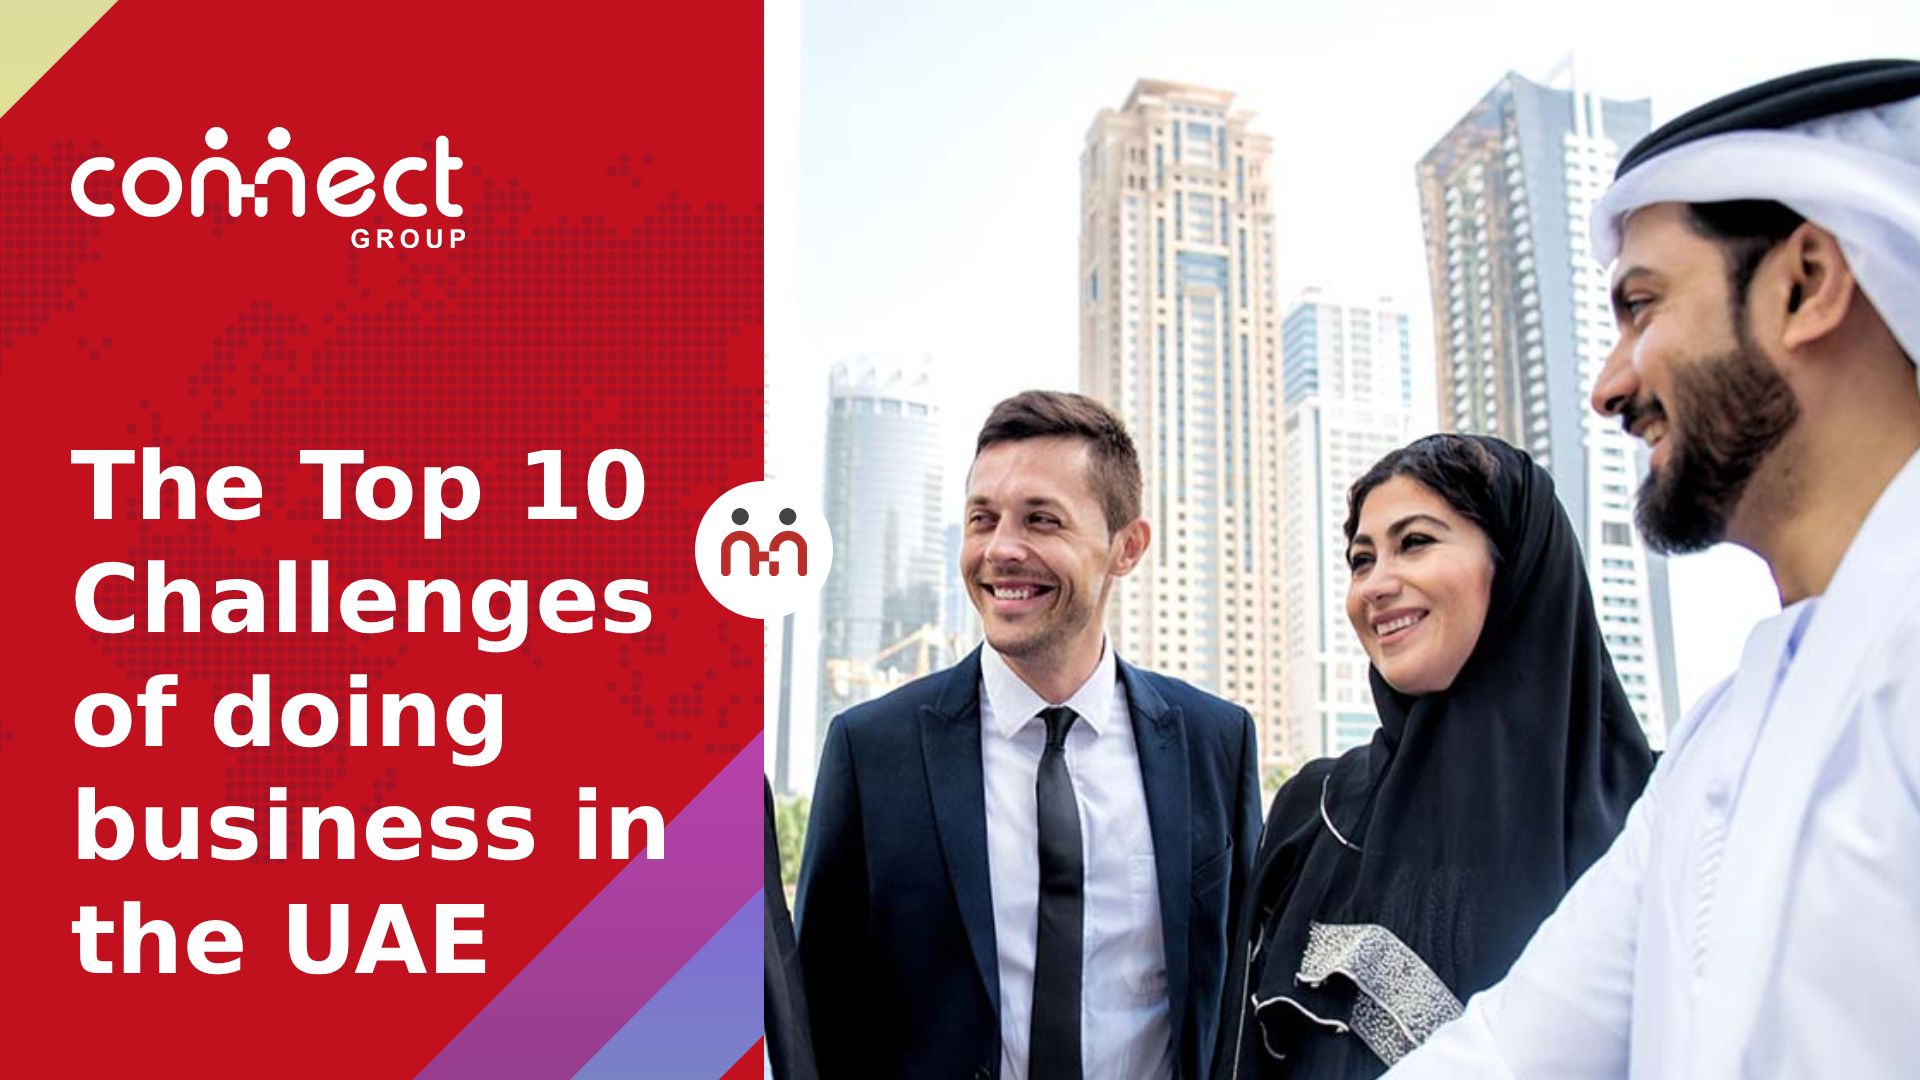 The Top 10 Challenges of doing business in the UAE